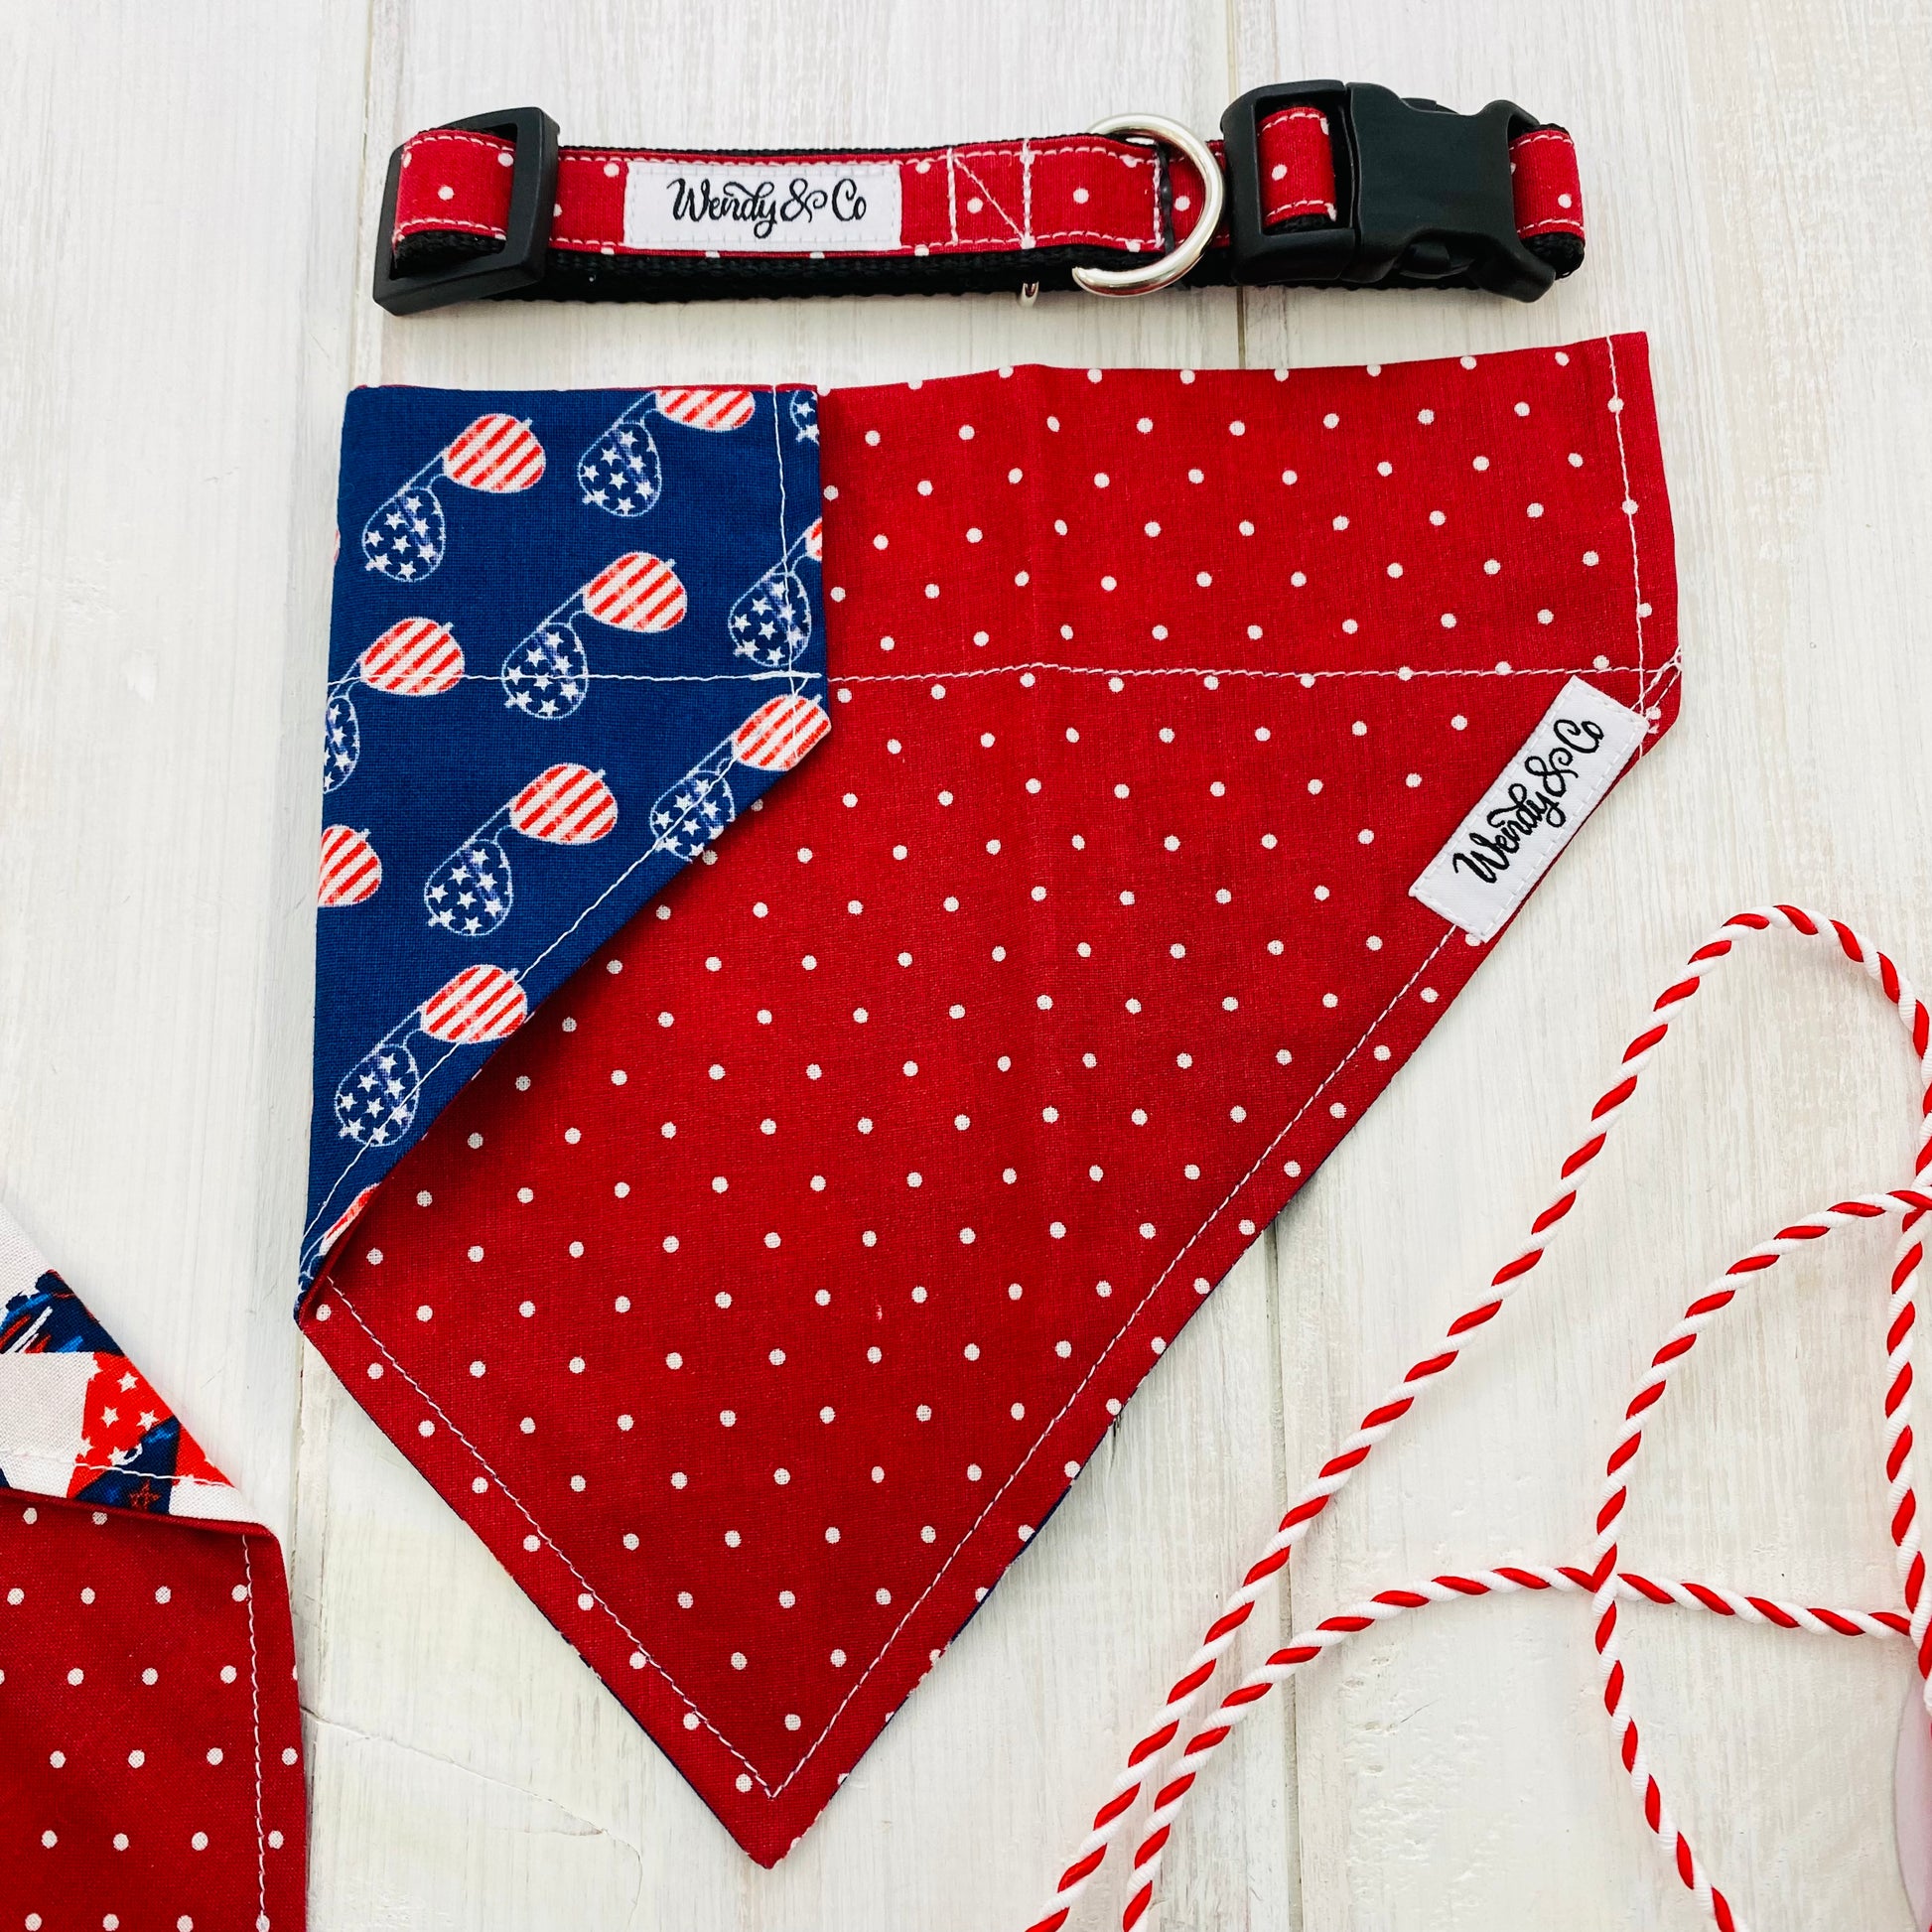 Festive reversible dog bandana in red dot and reverses to navy USA sun glasses. Shown with red dot collar.